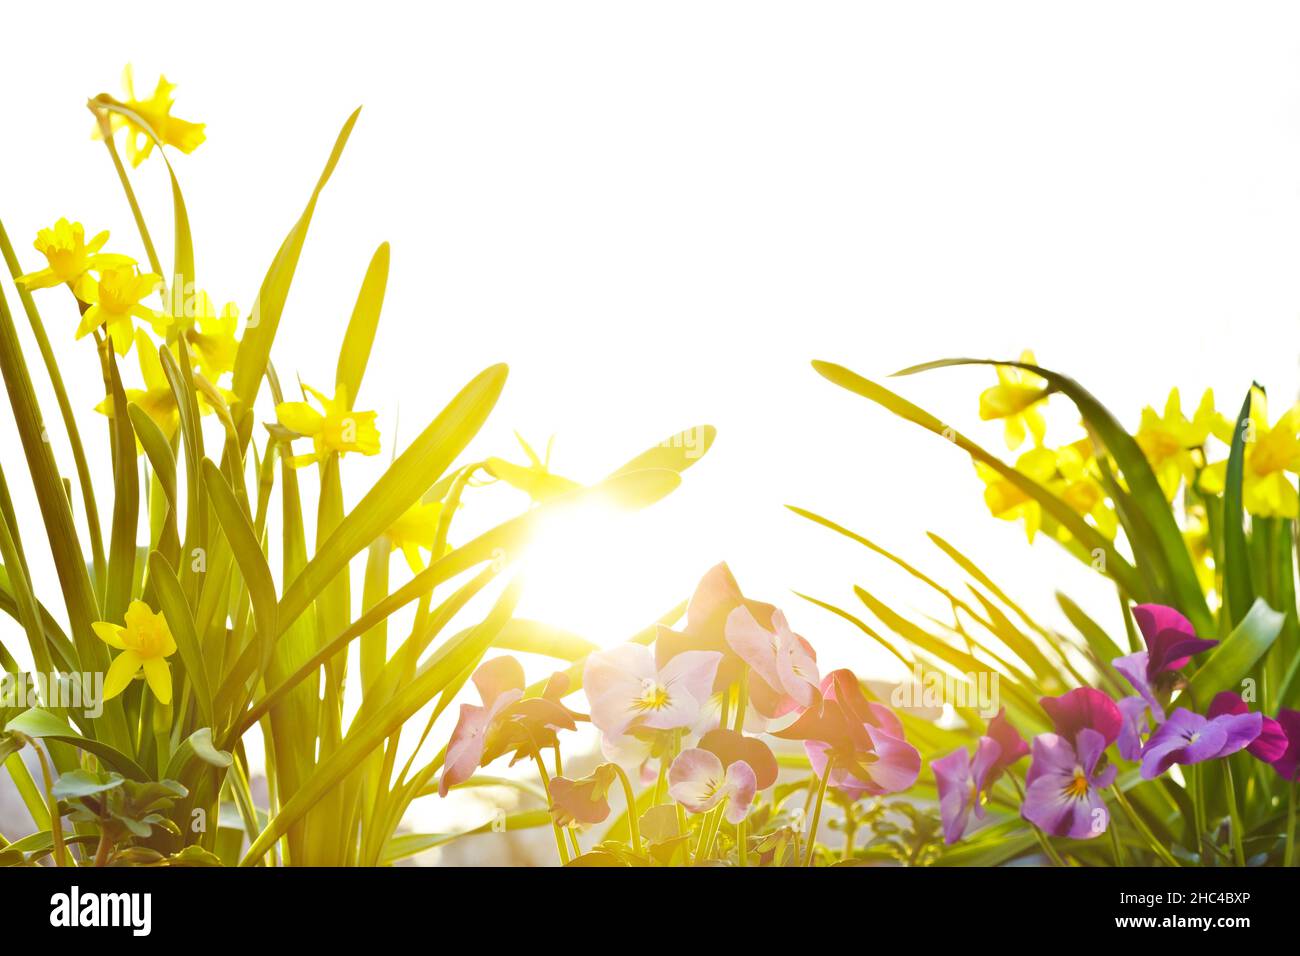 Closeup of small yellow daffodils in full bloom and purple pansy flowers in the morning sun, worm's-eye view. Stock Photo